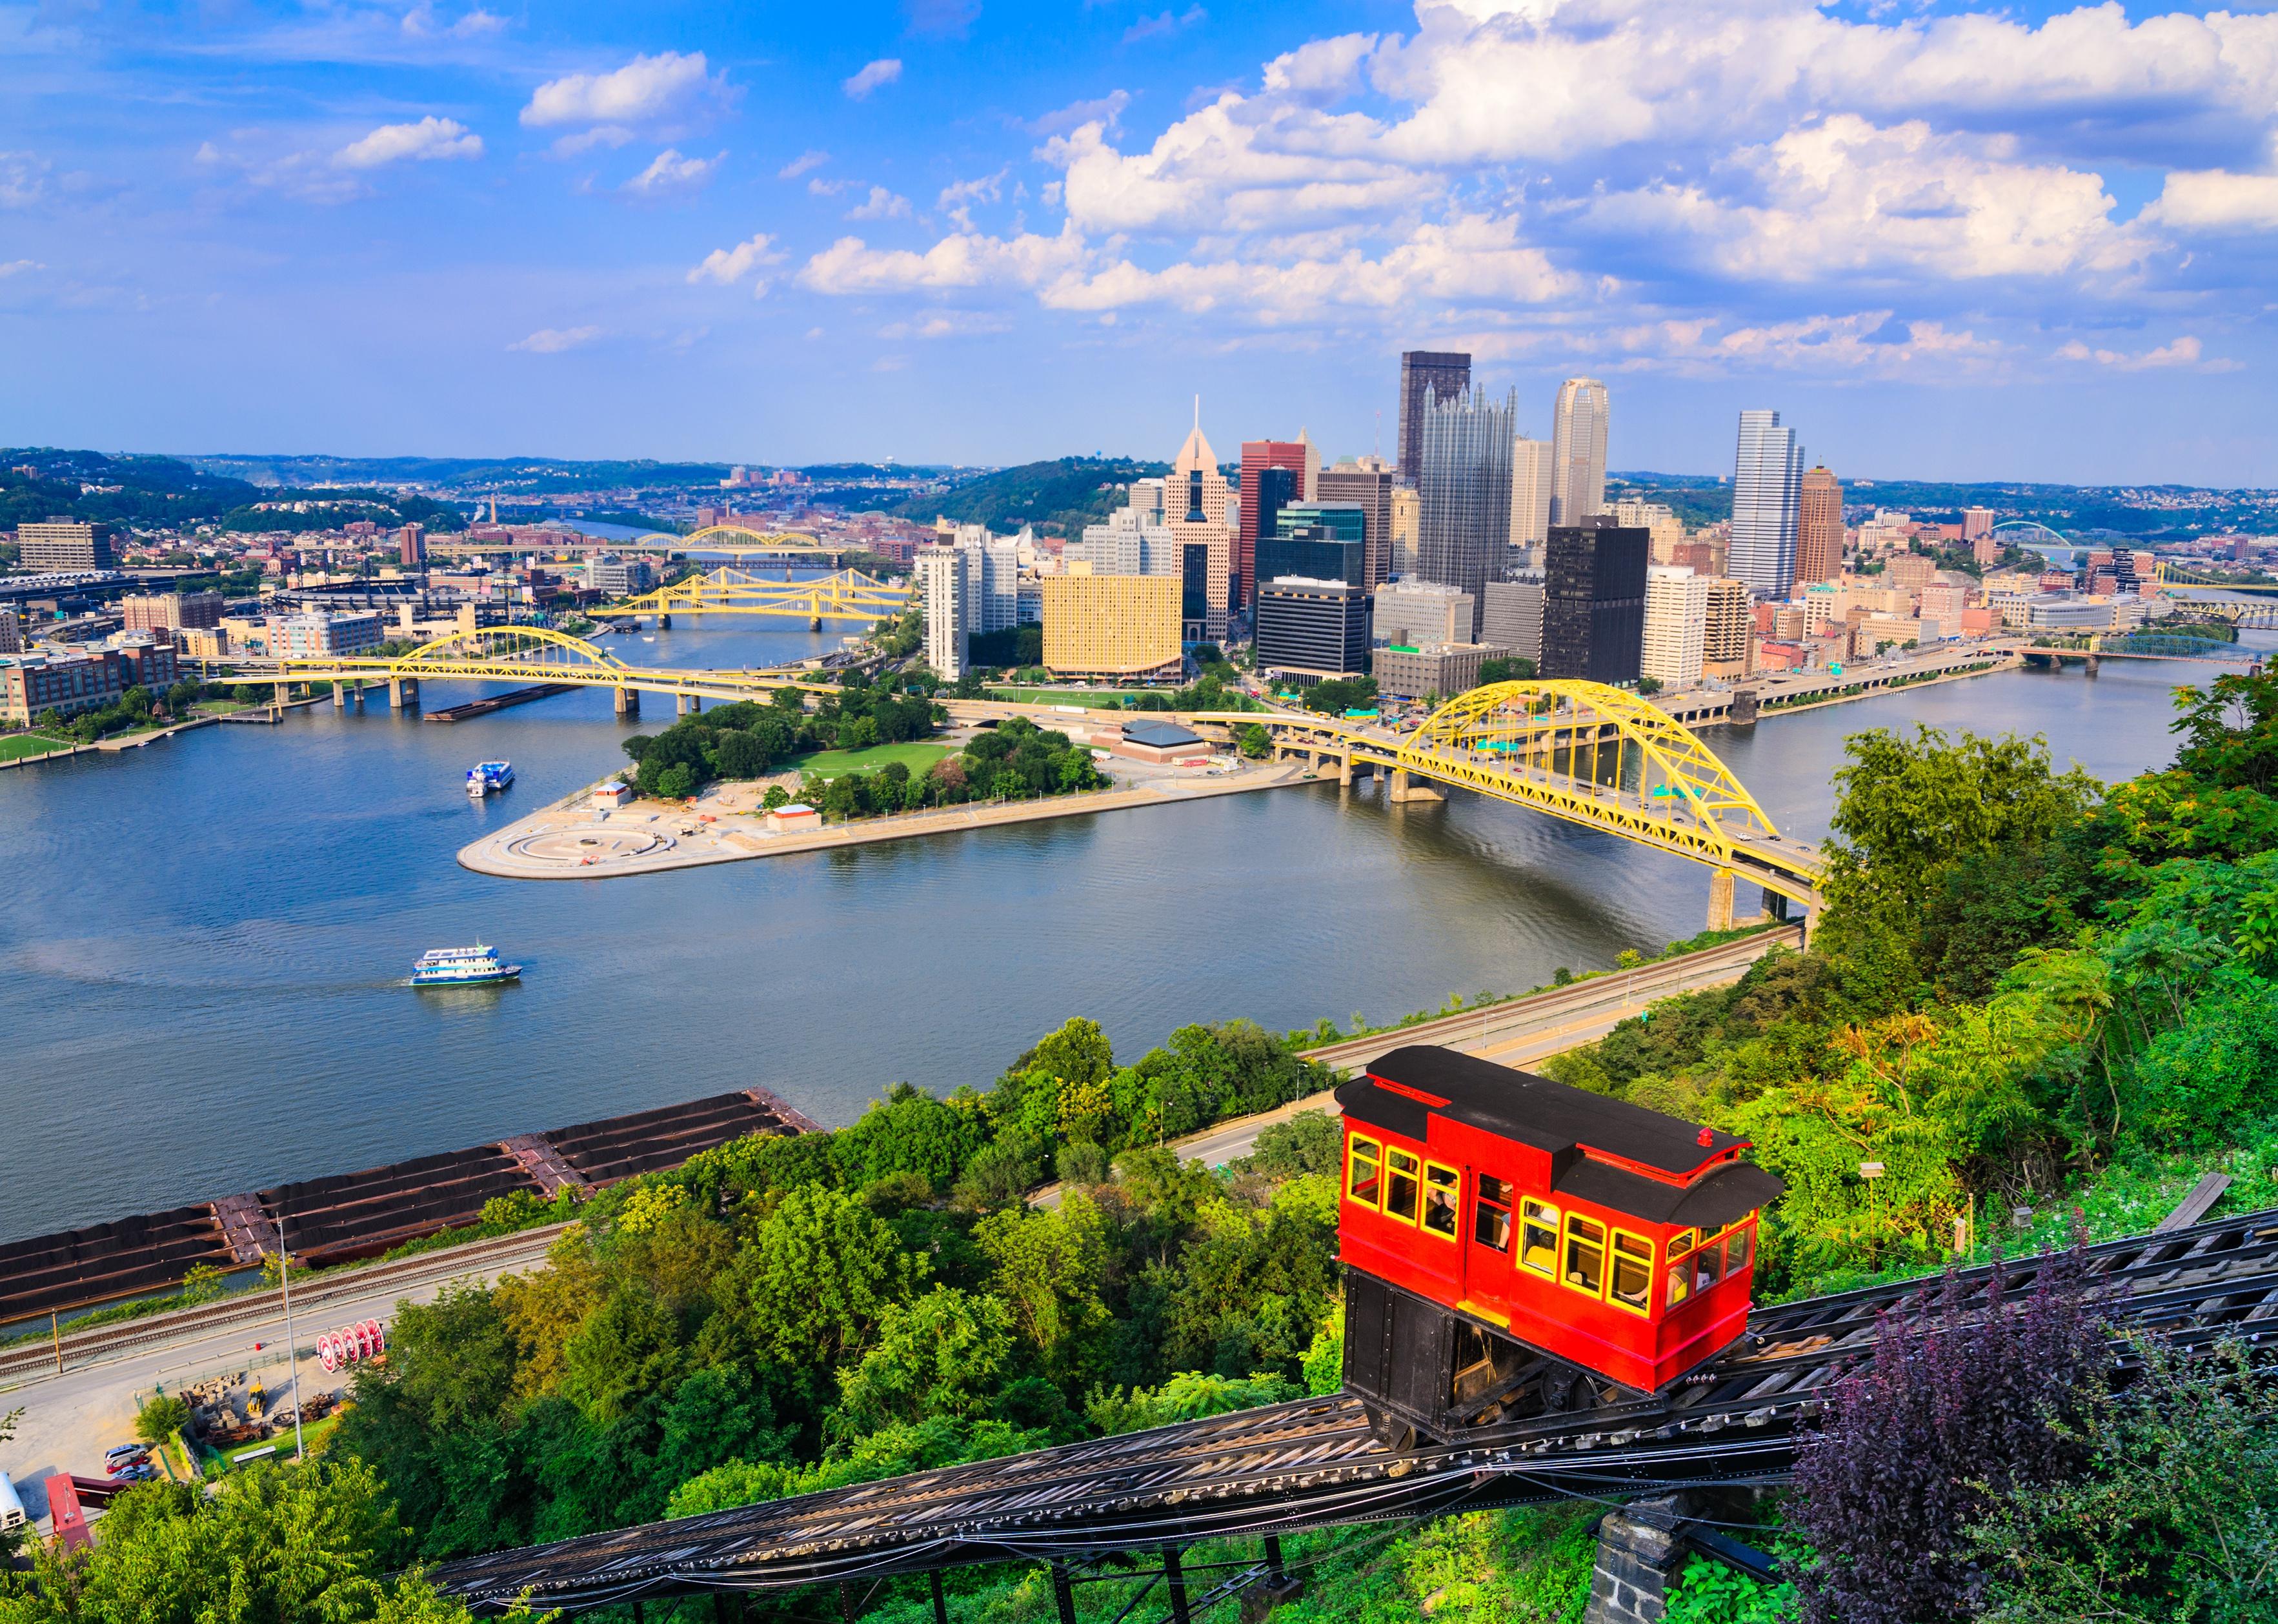 Downtown skyline of Pittsburgh.